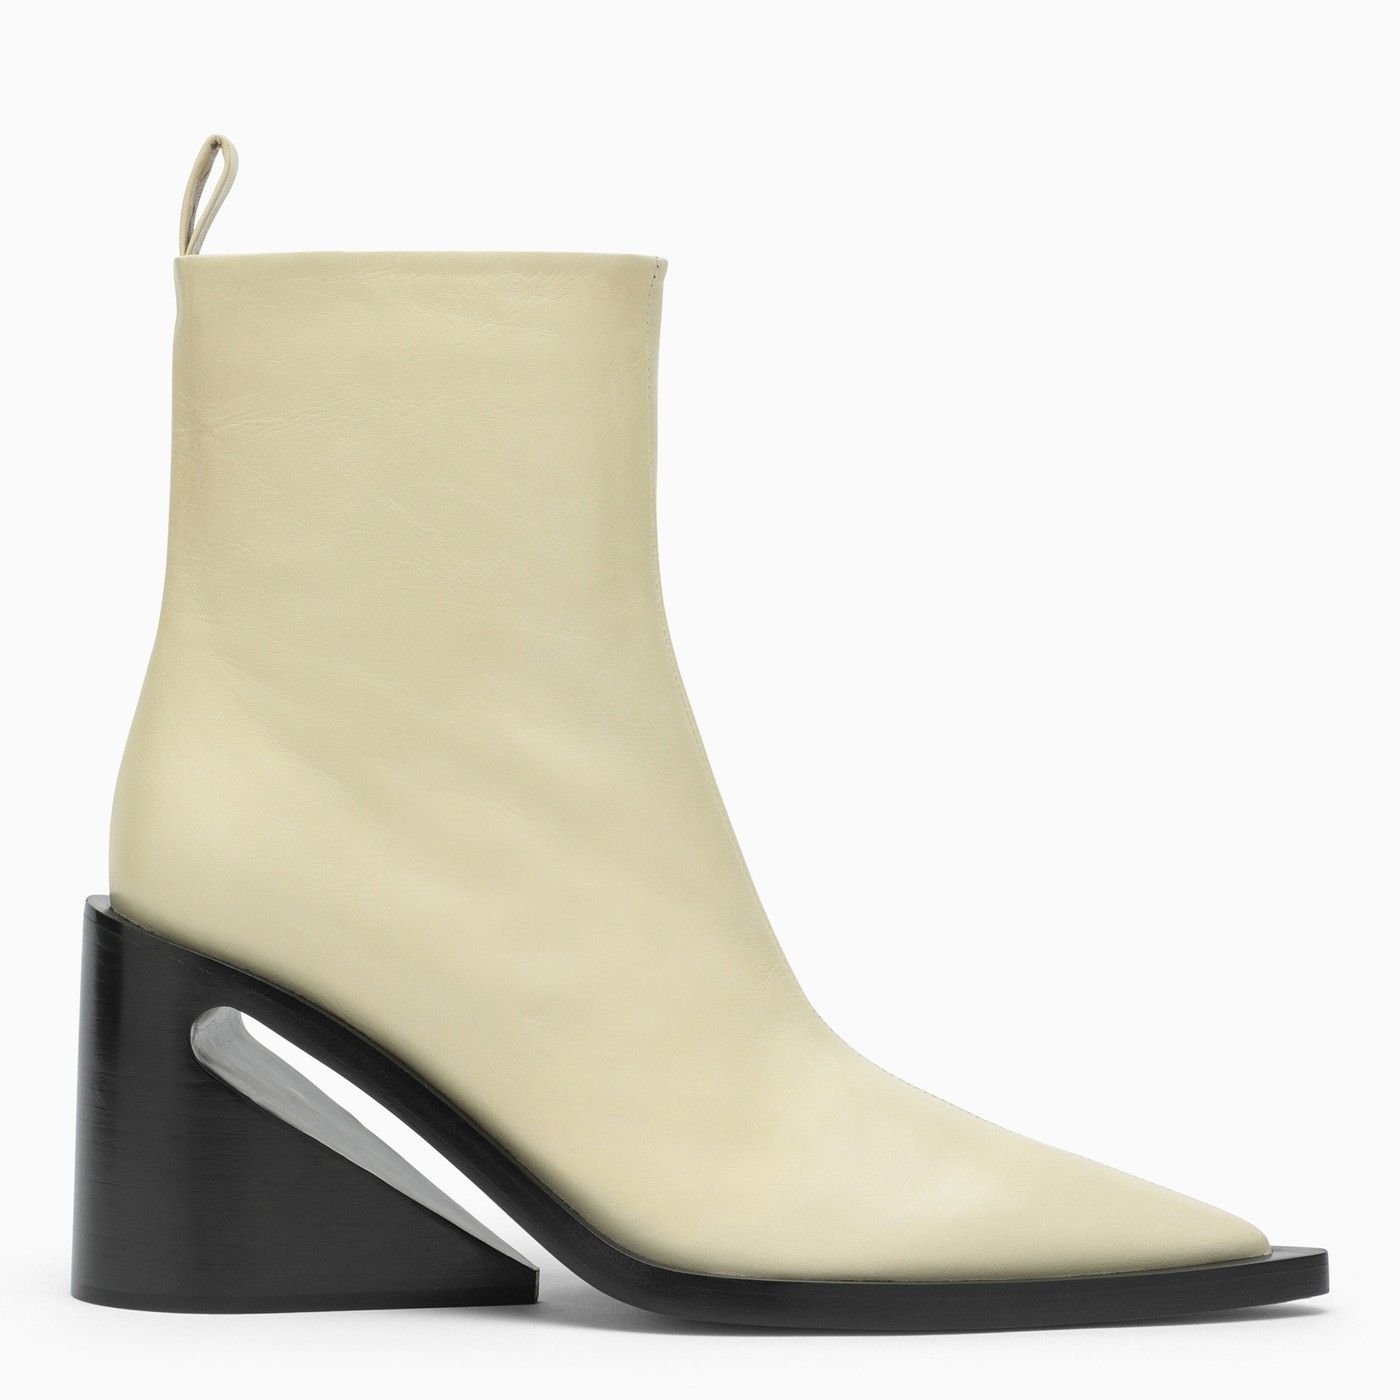 Ivory leather ankle boot | The Double F